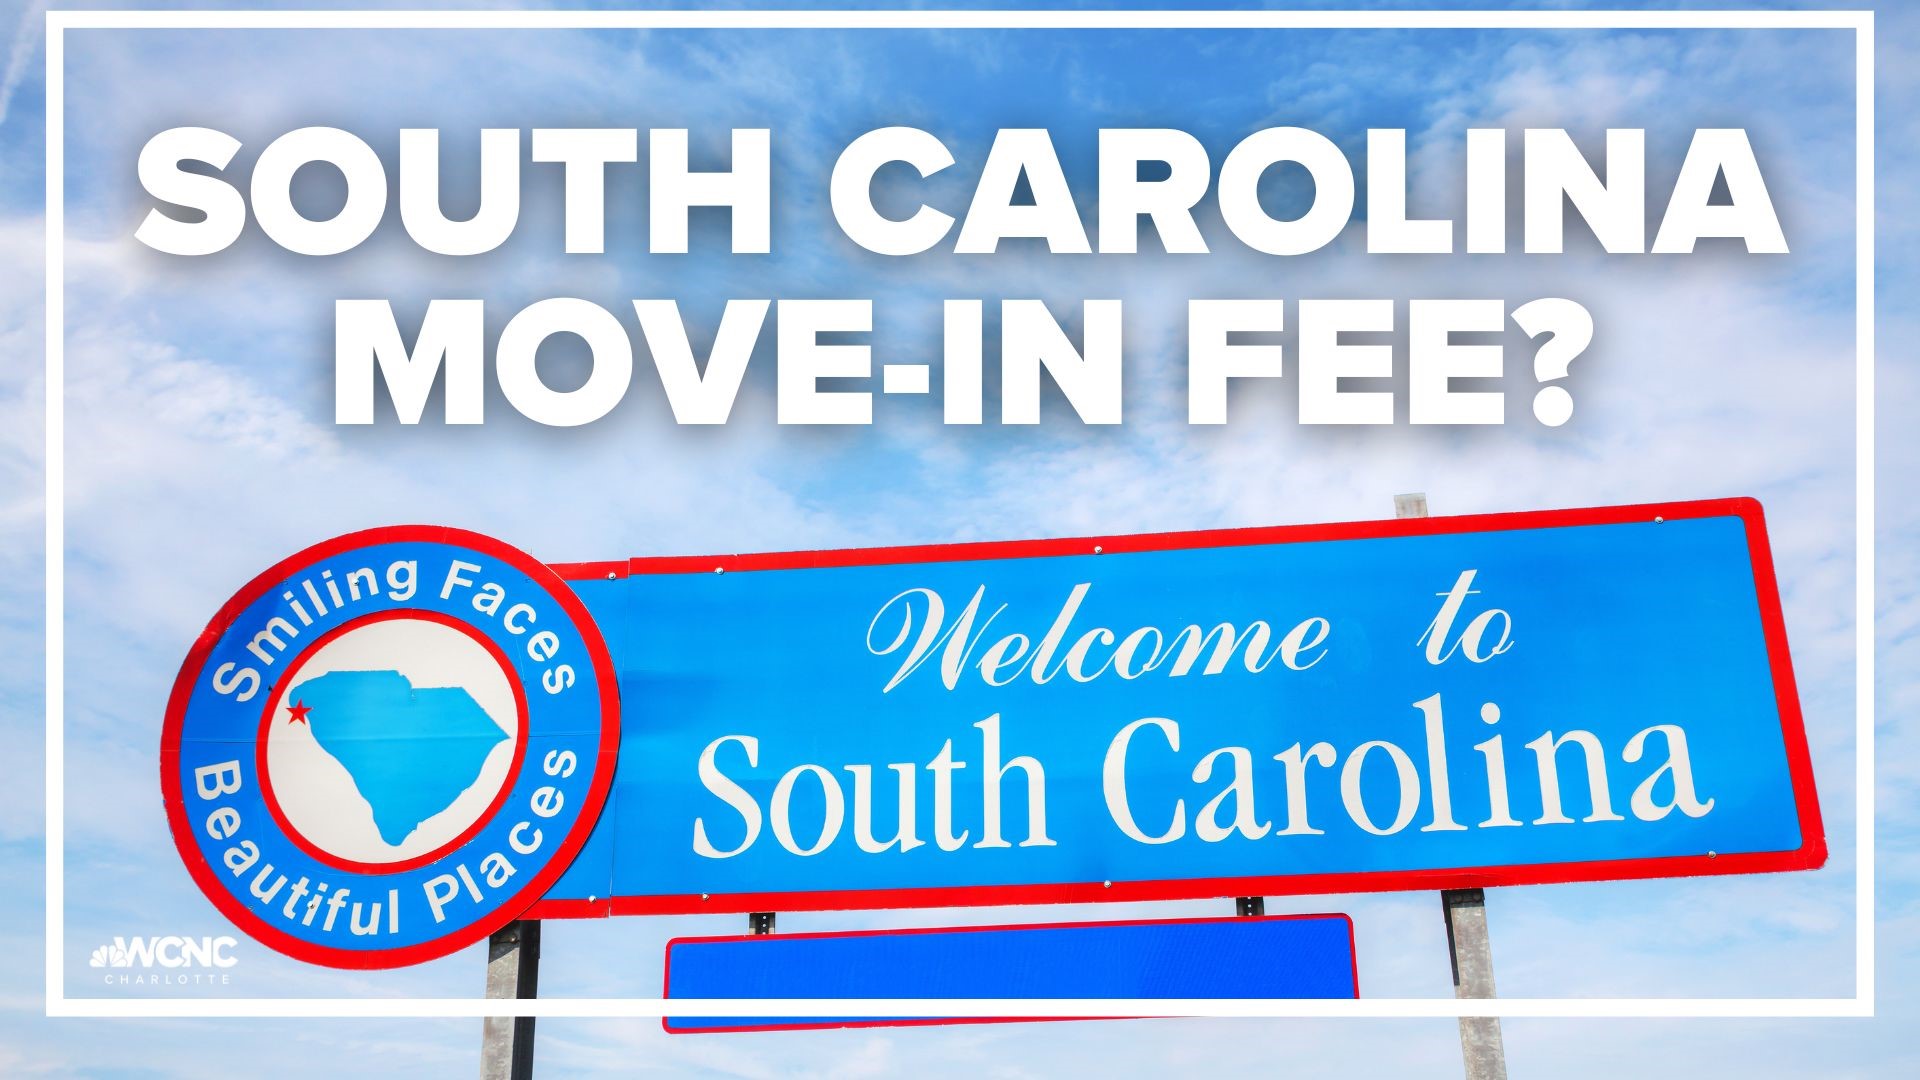 Sen. Stephen Goldfinch pre-filed a bill that he says would offset the cost of growth in South Carolina by proposing a $250 fee for new residents.